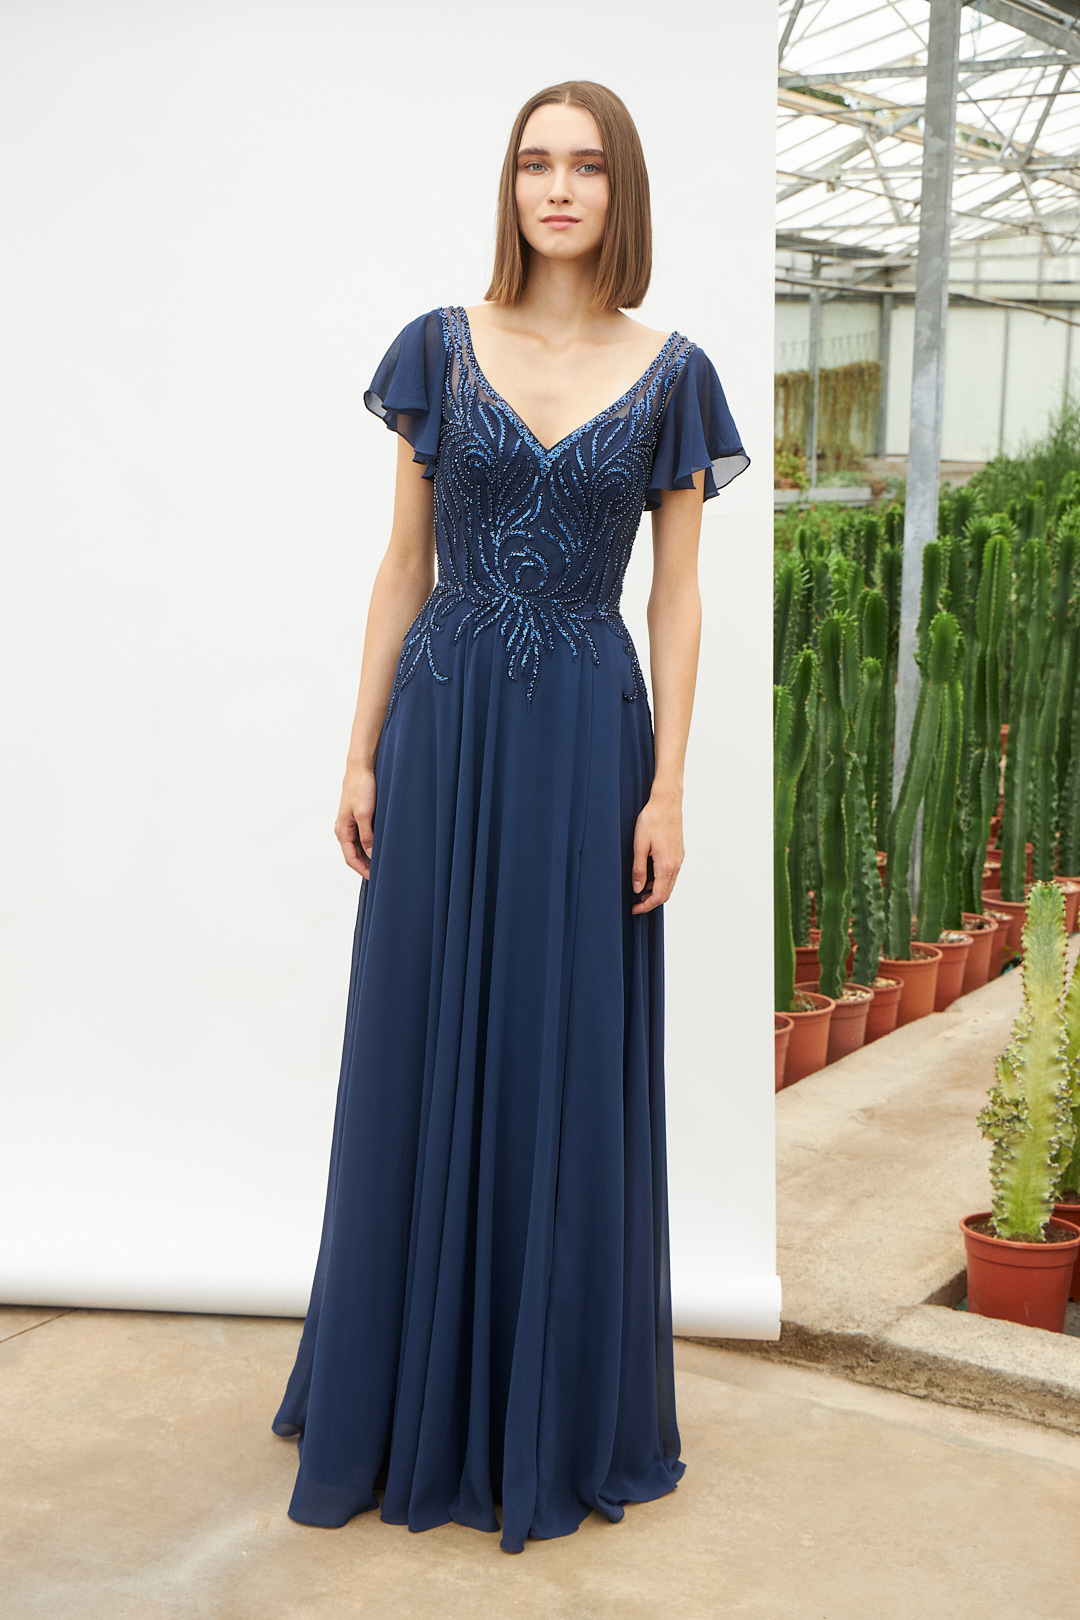 Classic Dresses / Long classic chiffon dress with beaded top and chiffon sleeves